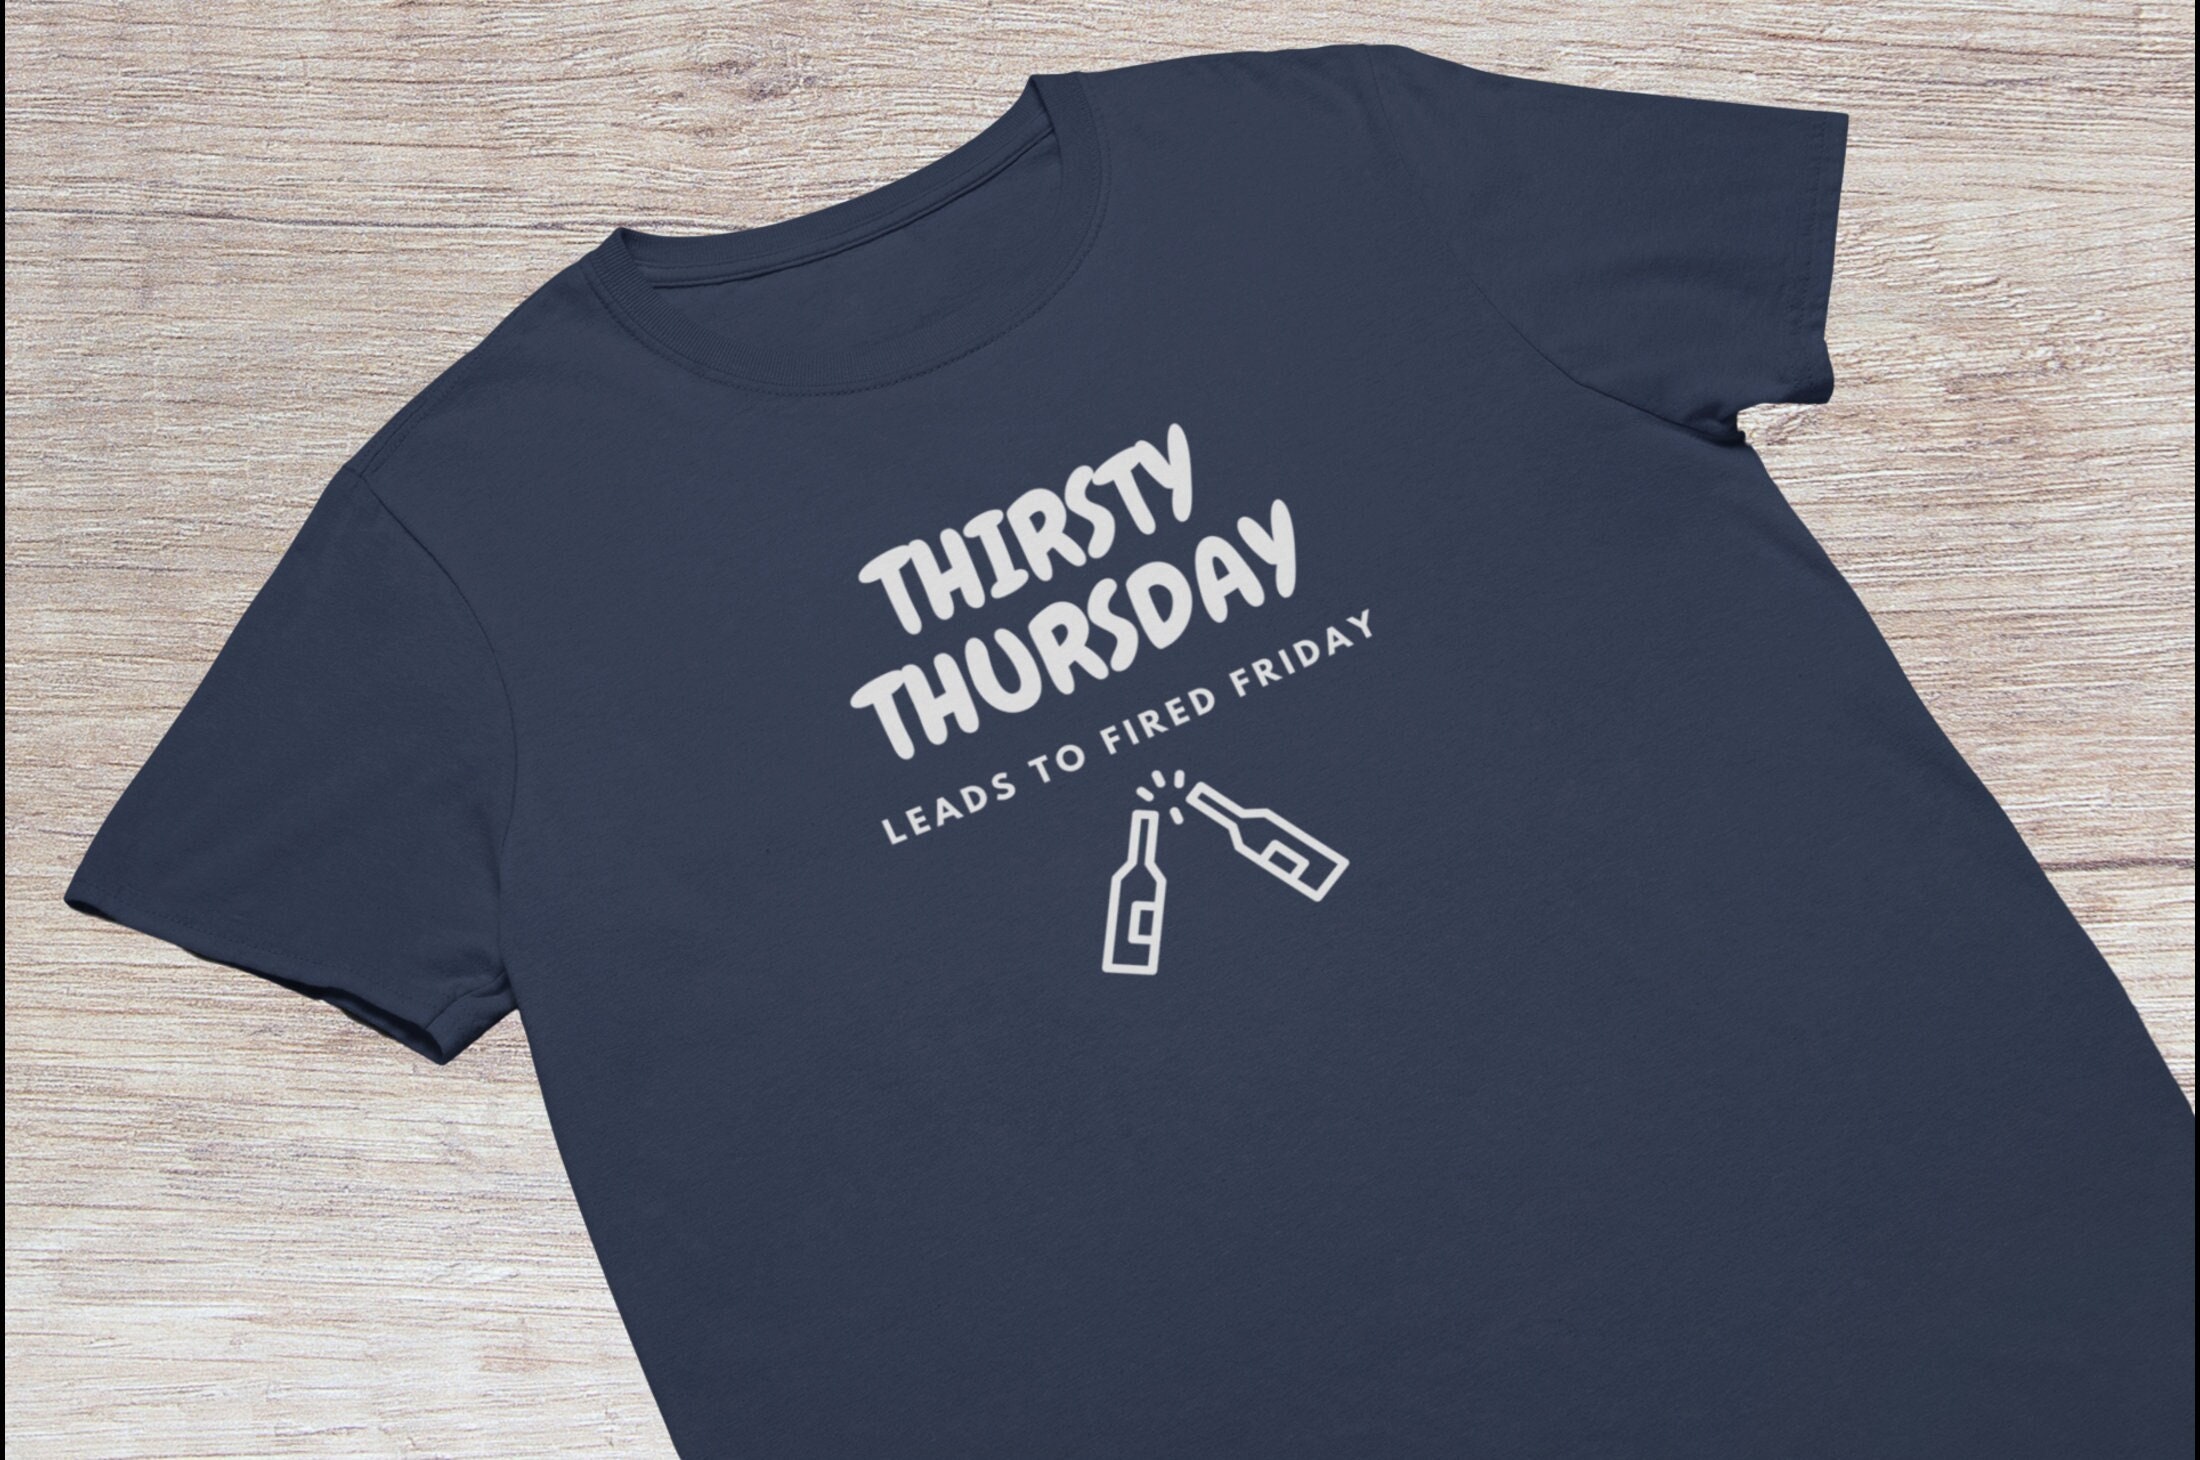 Thirsty Thursday Leads to Friday Men's T -